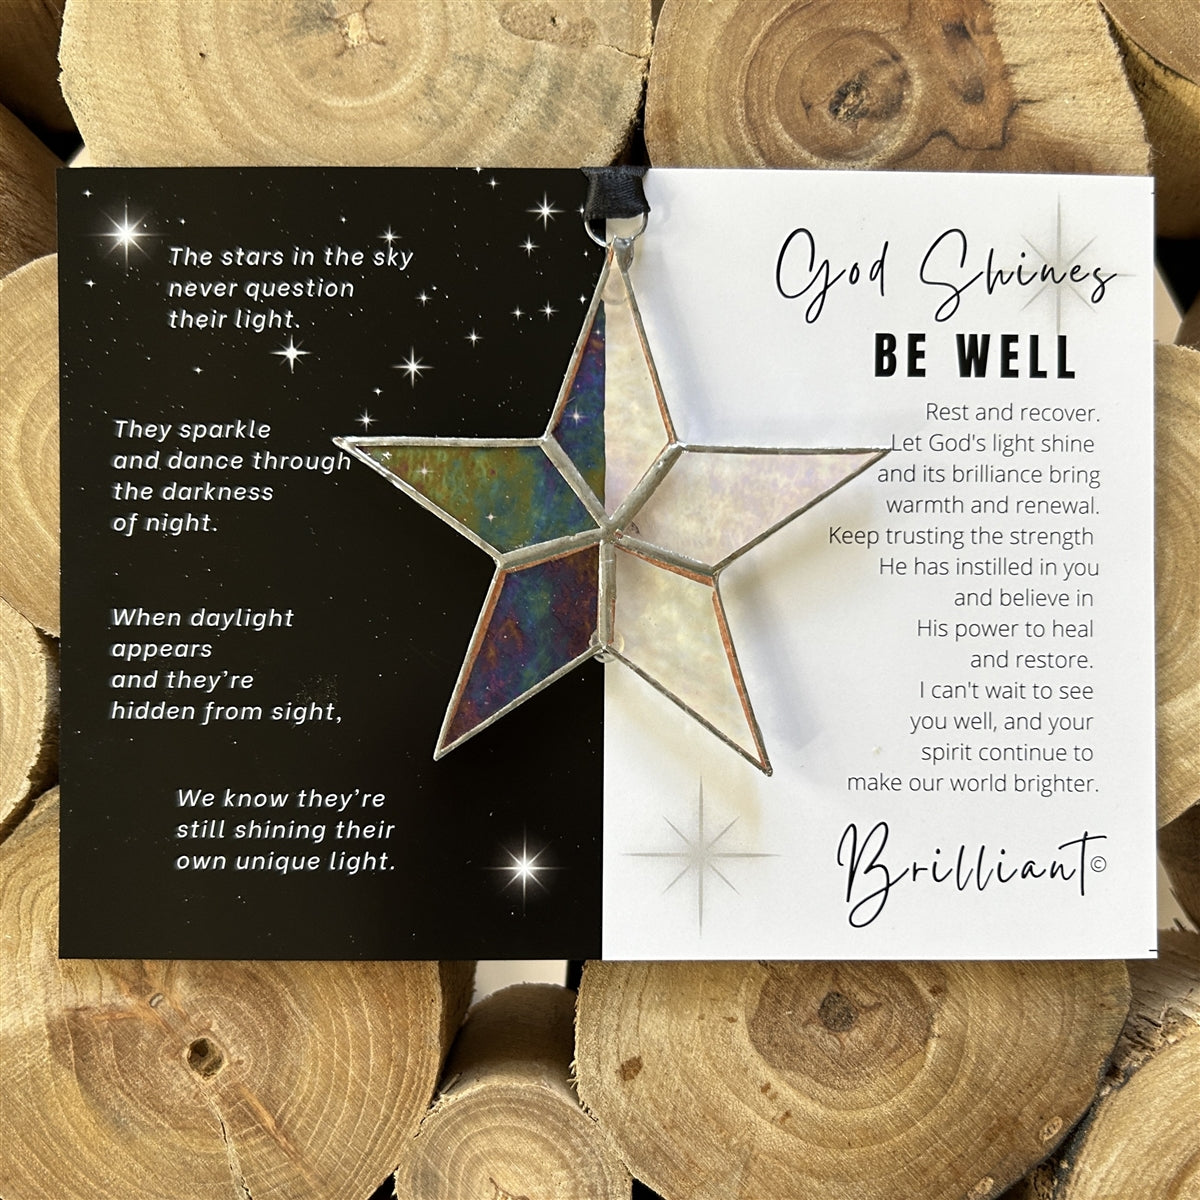 Be Well star and artwork with the &quot;God Shines&quot; poem on the left side and the &quot;Be Well&quot; sentiment on the right side.